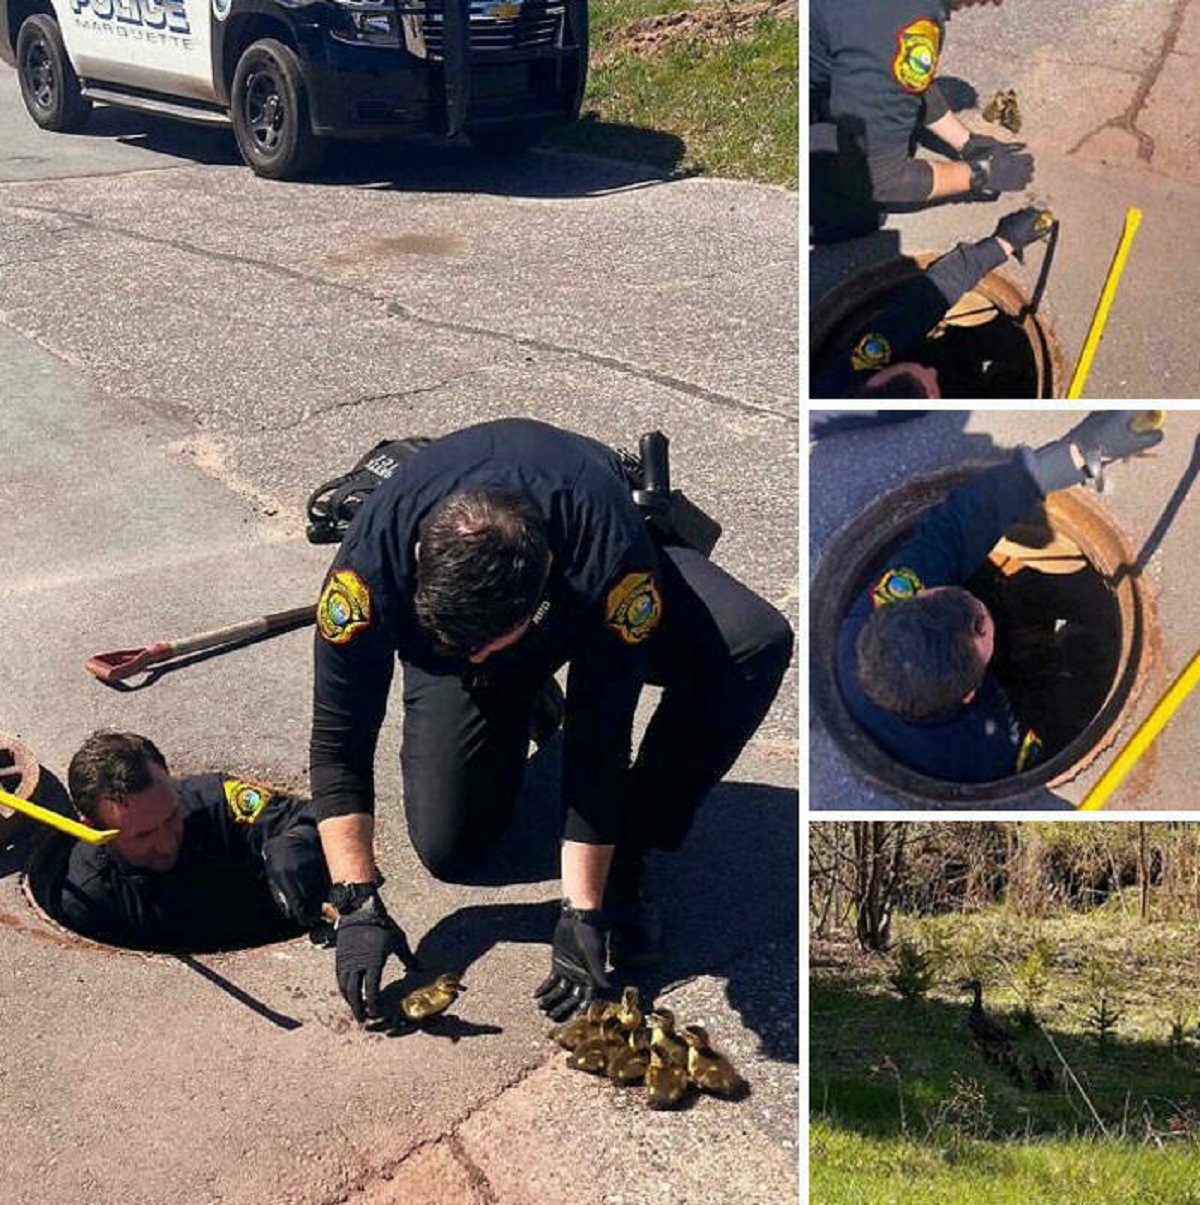 "Cops Save Ducklings From Being Washed Out To Lake Superior. Officer Rieboldt Ducked Into A Storm Drain To Save These 8 Little Babies. The Ducklings Were Reunited With Their Mother"